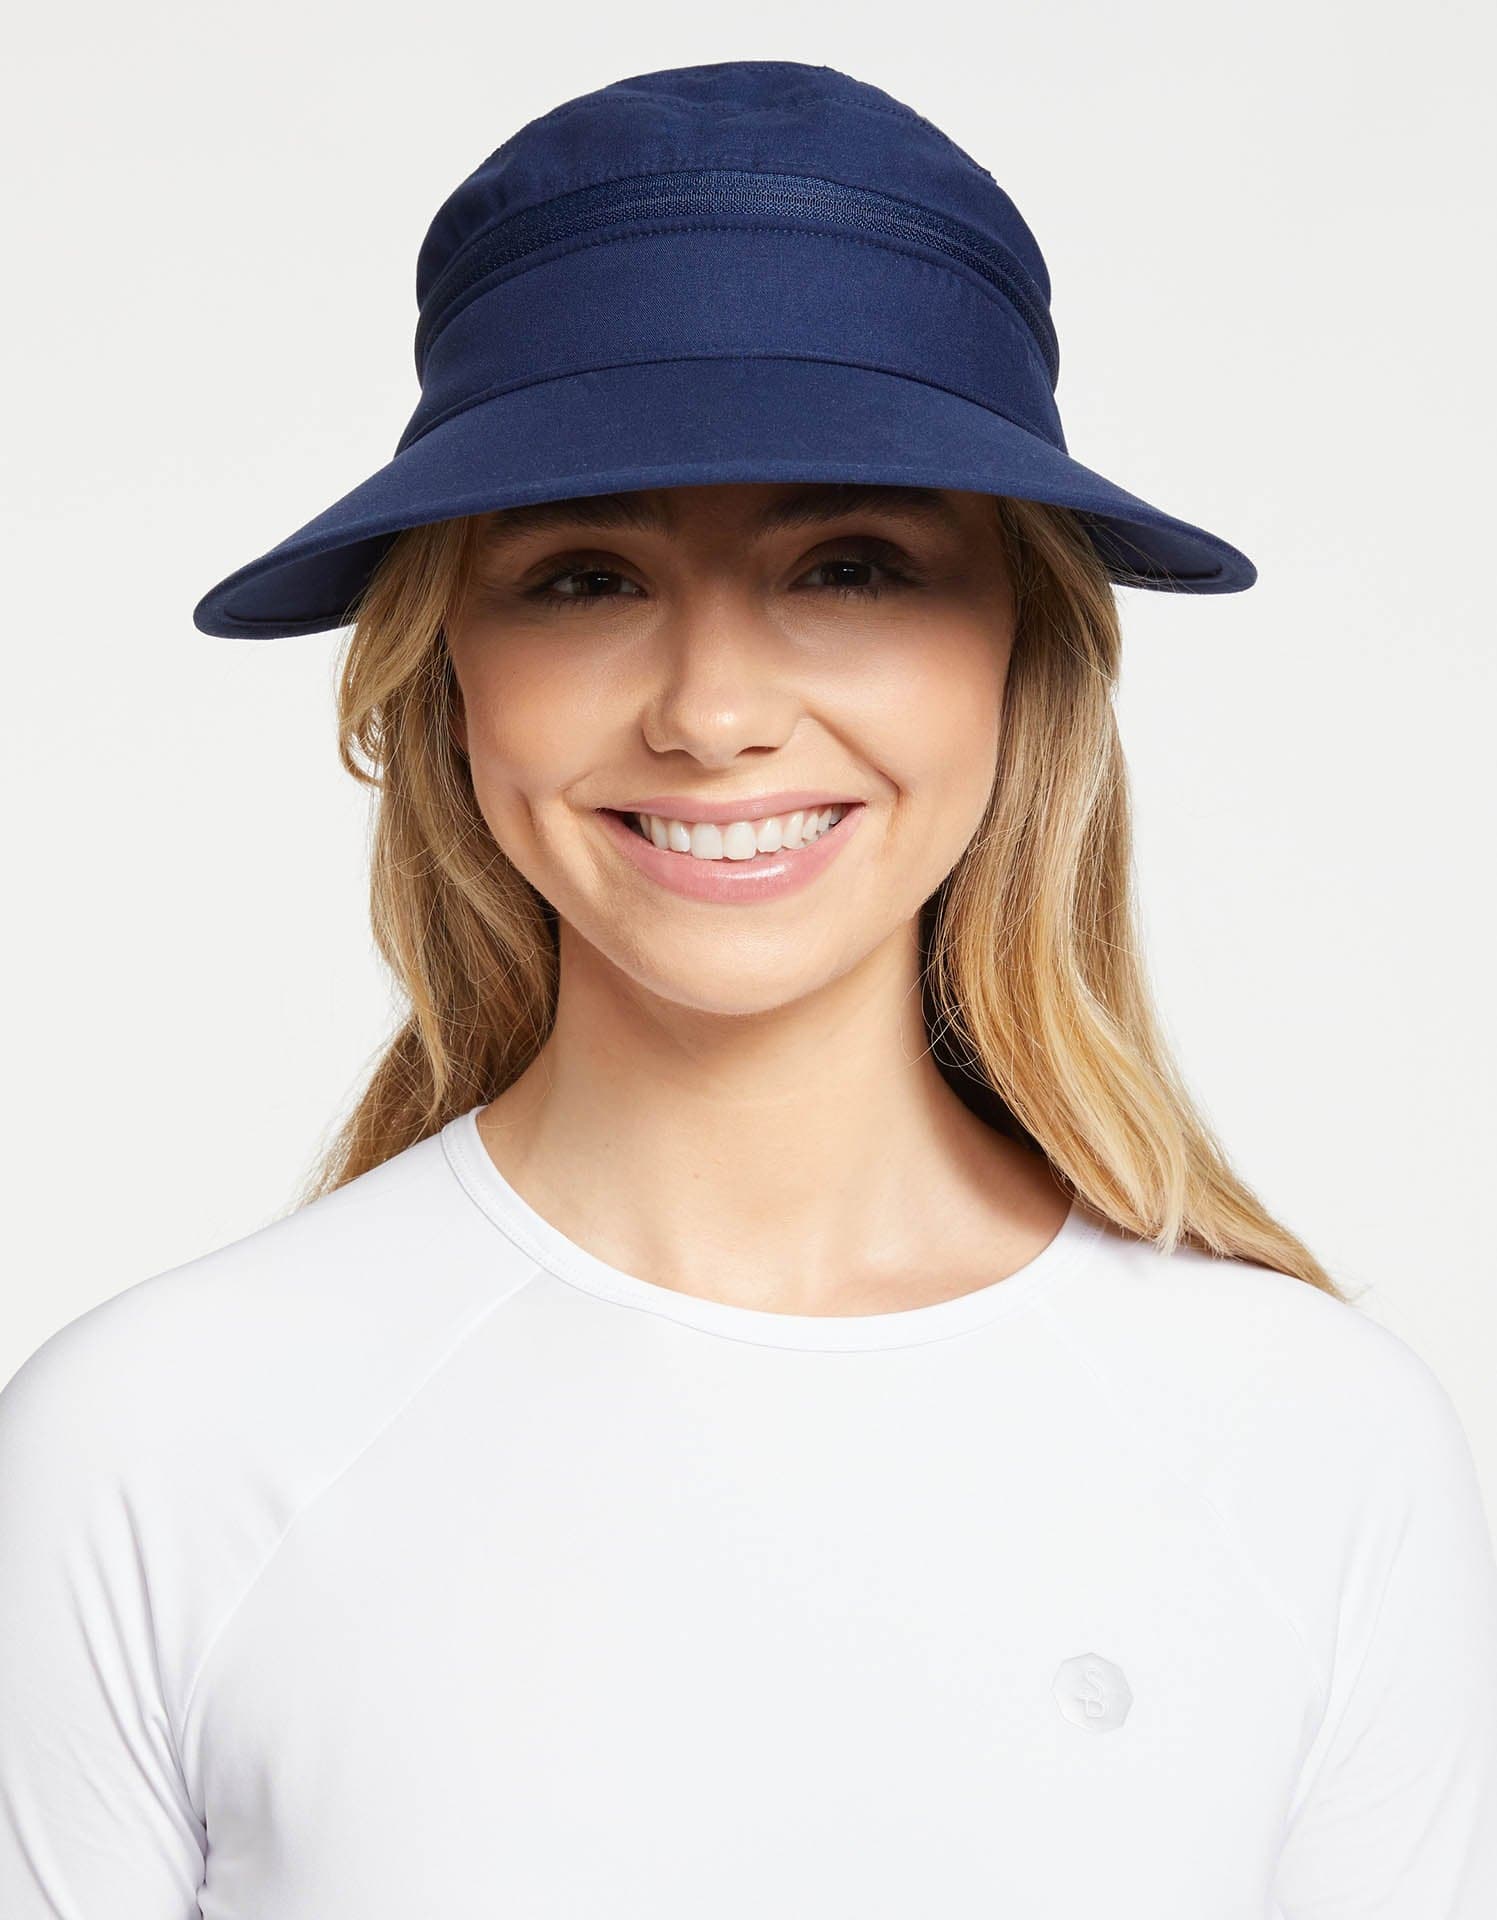 Storey - Solbari - Everyday Sun Hat UPF 50+ Packable, lightweight and  adjustable, the Everyday Sun Hat offers you exceptional sun protection for  the face, eyes, ears and back of the neck.